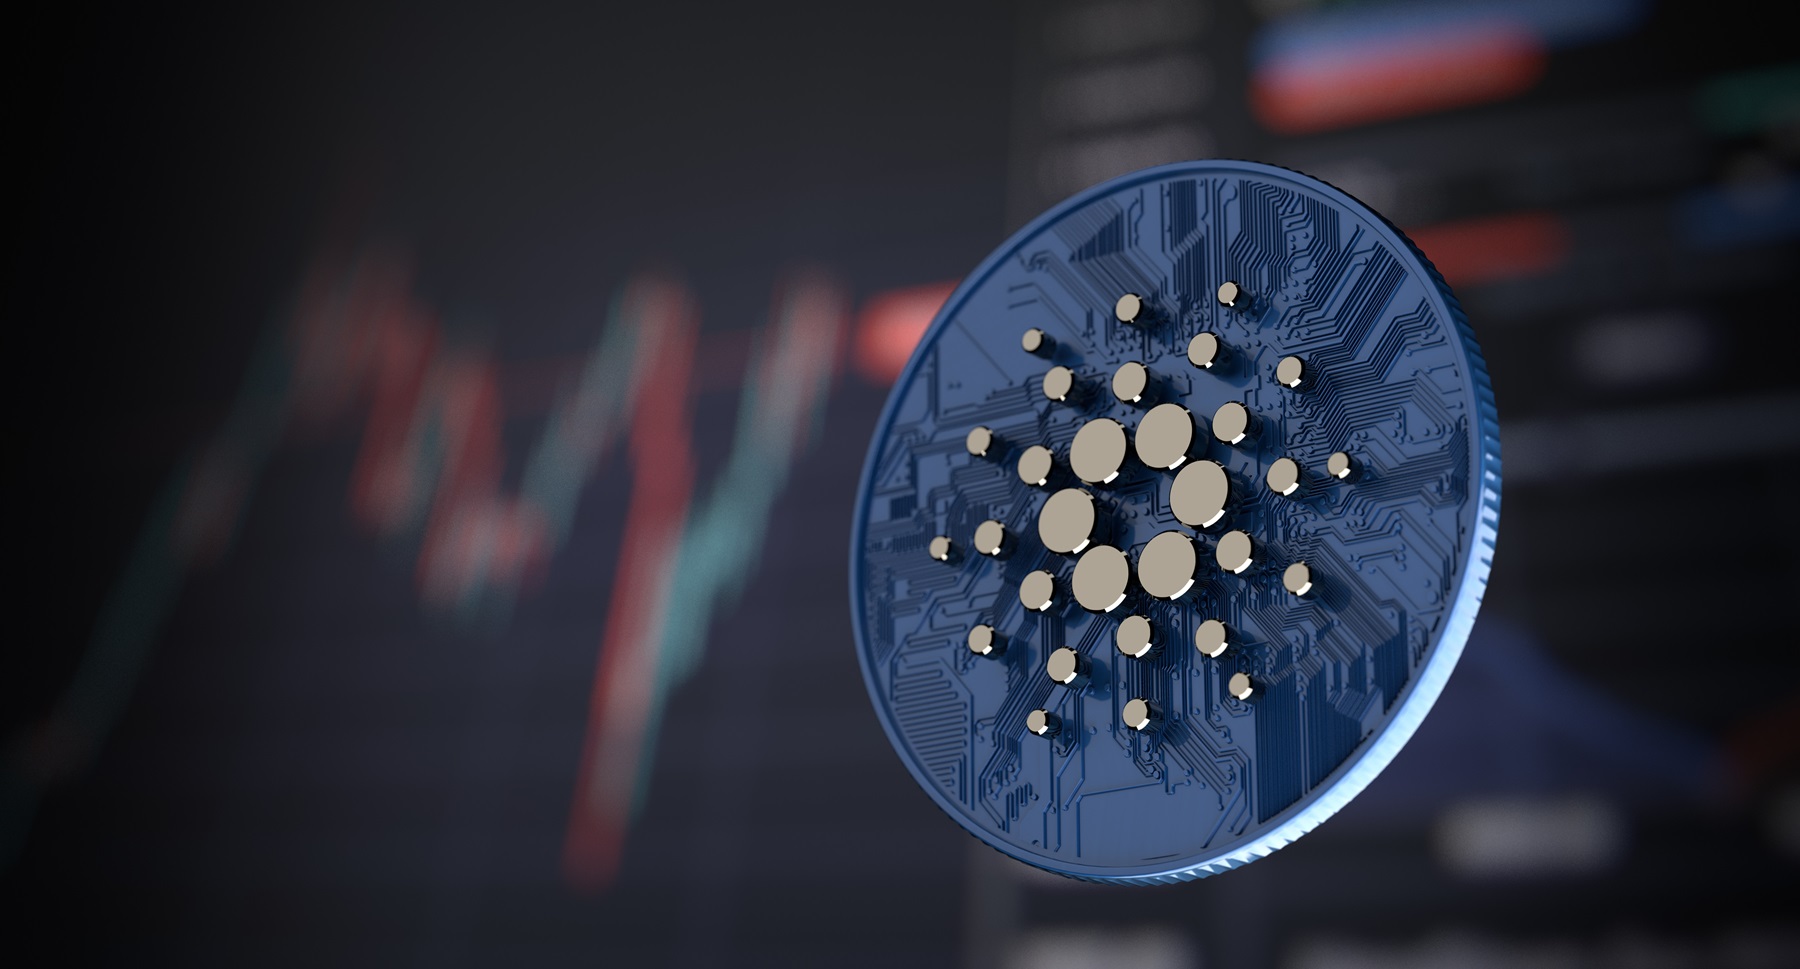 Cardano Foundation Gears Up For Chang Hard Fork, Governance Transition